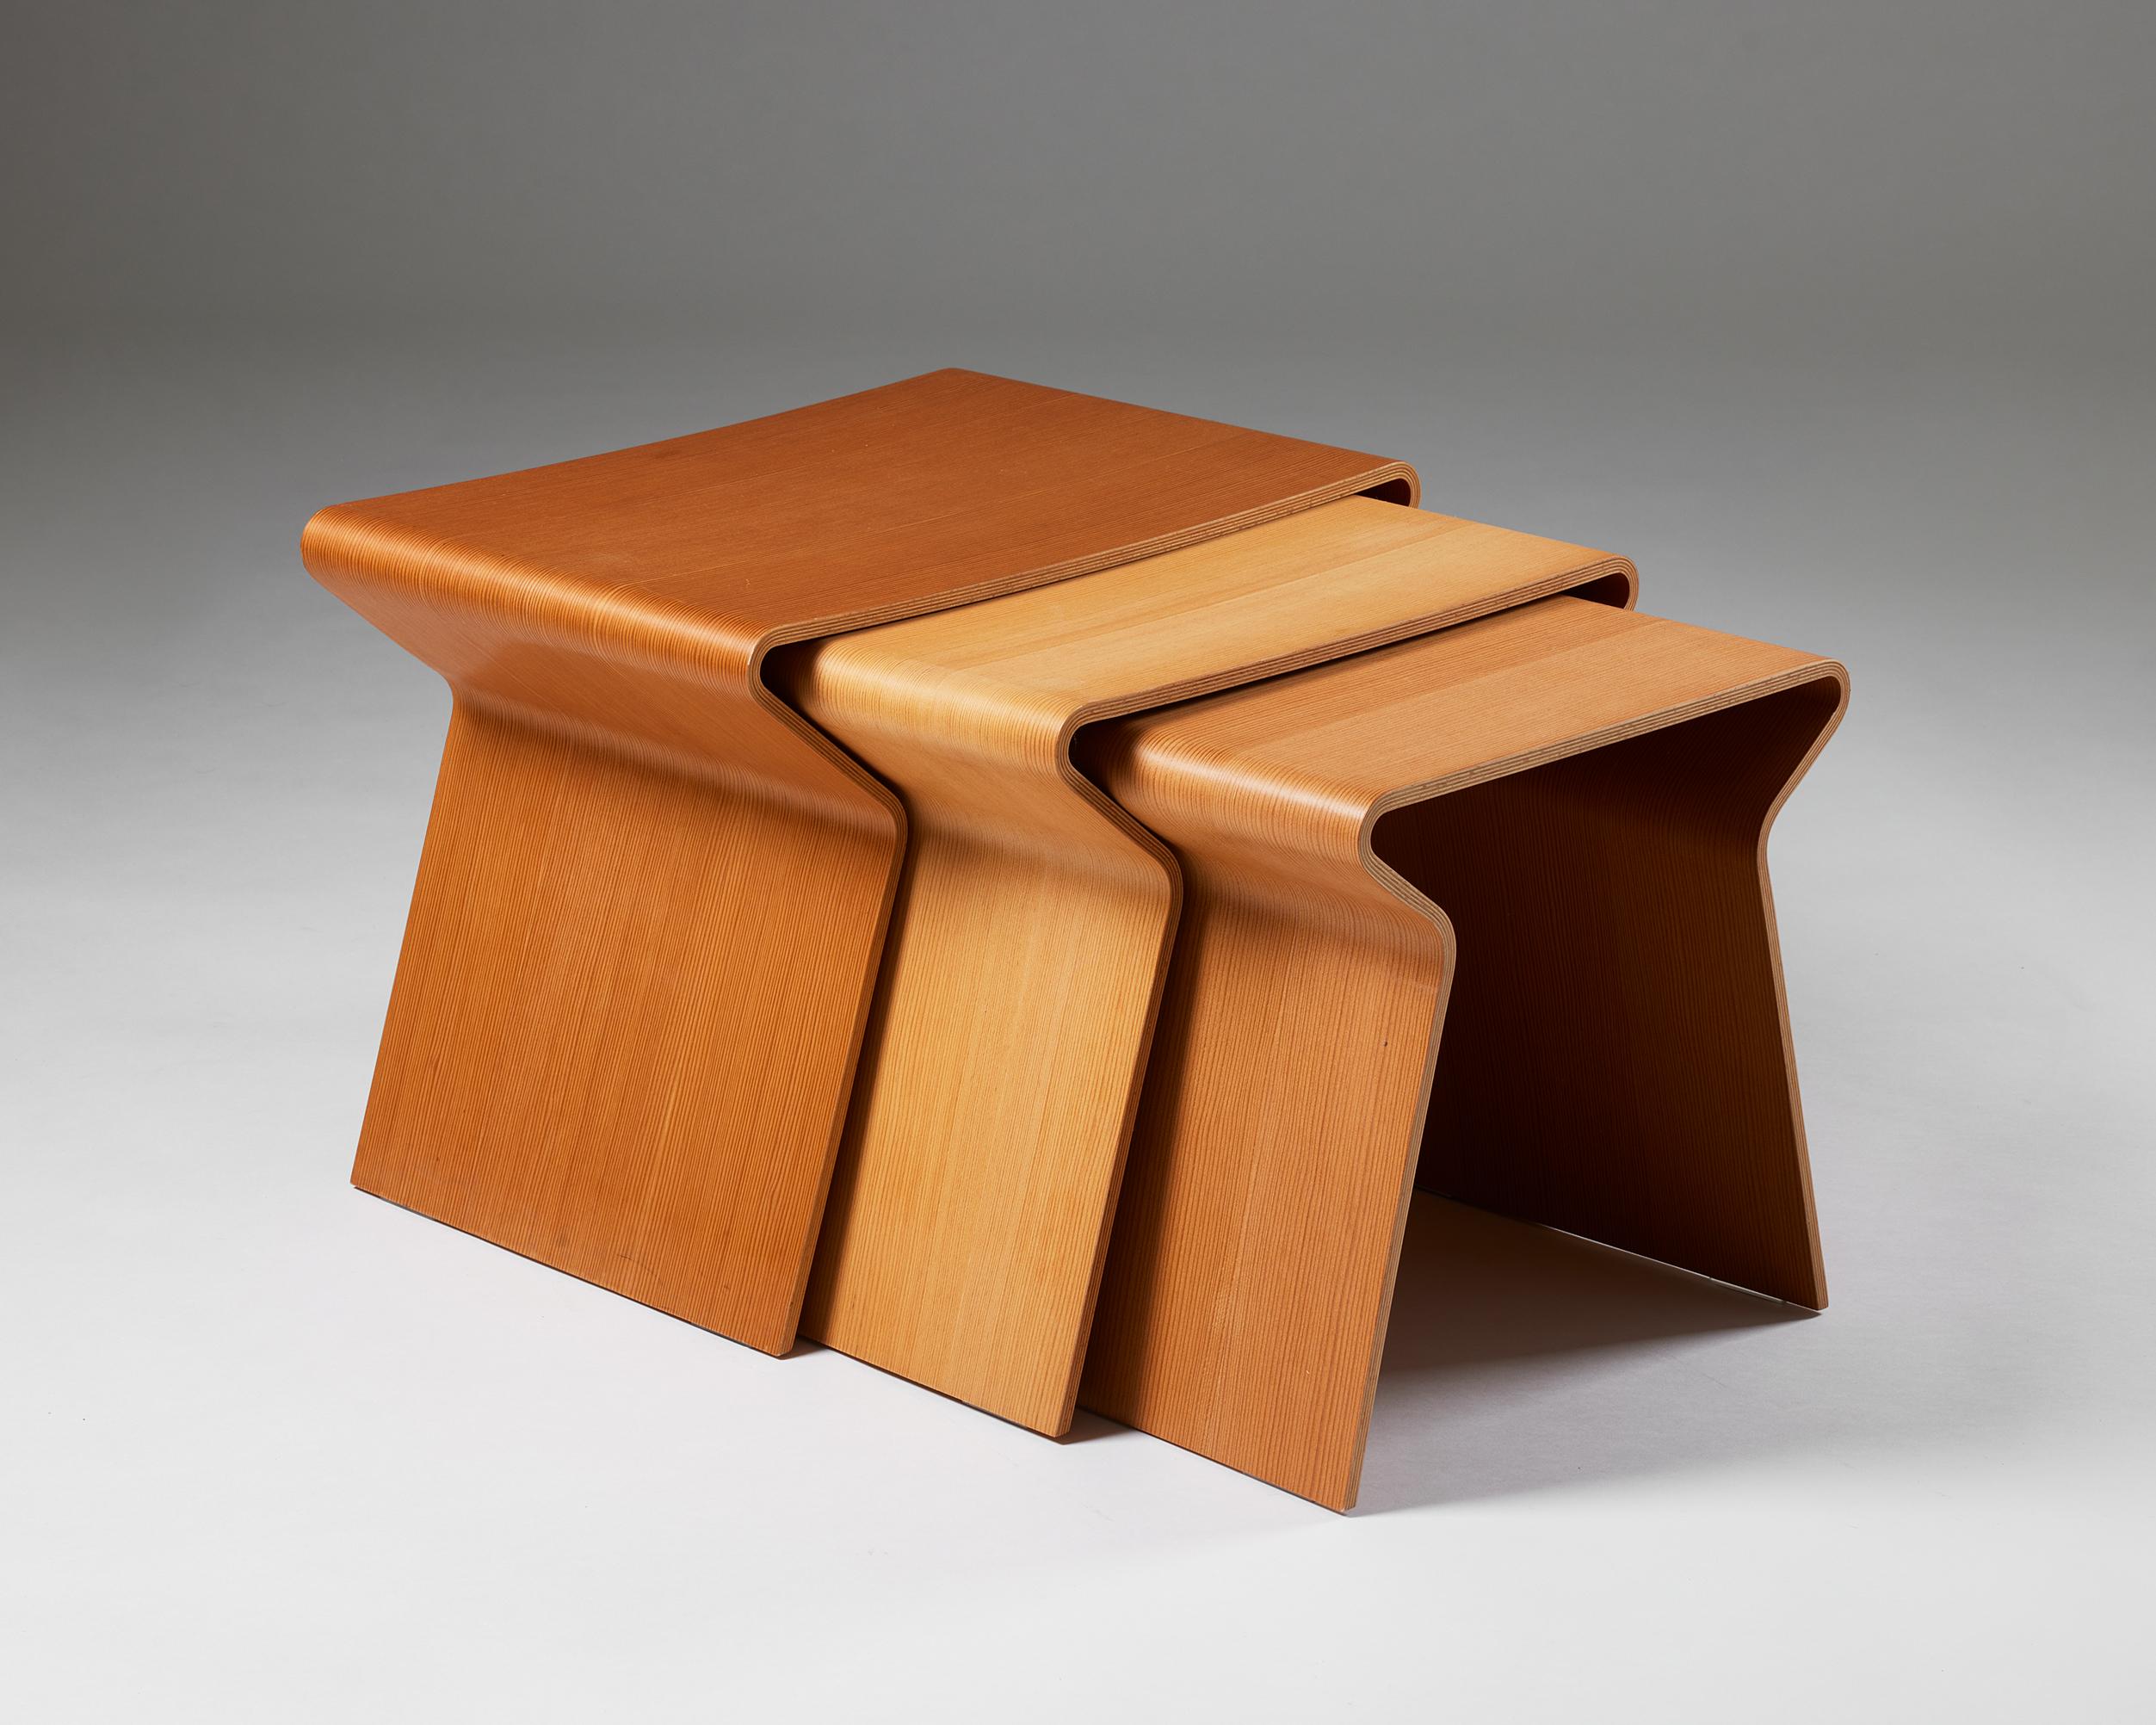 Set of three nesting tables designed by Grete Jalk for Lange Production,
Denmark, 1963.

The design is by Grete Jalk from 1963, and this set is was produced as a limited edition by Lange in 2008.

Oregon pine.

Stamped.

Small
H: 38 cm / 15''
W: 38